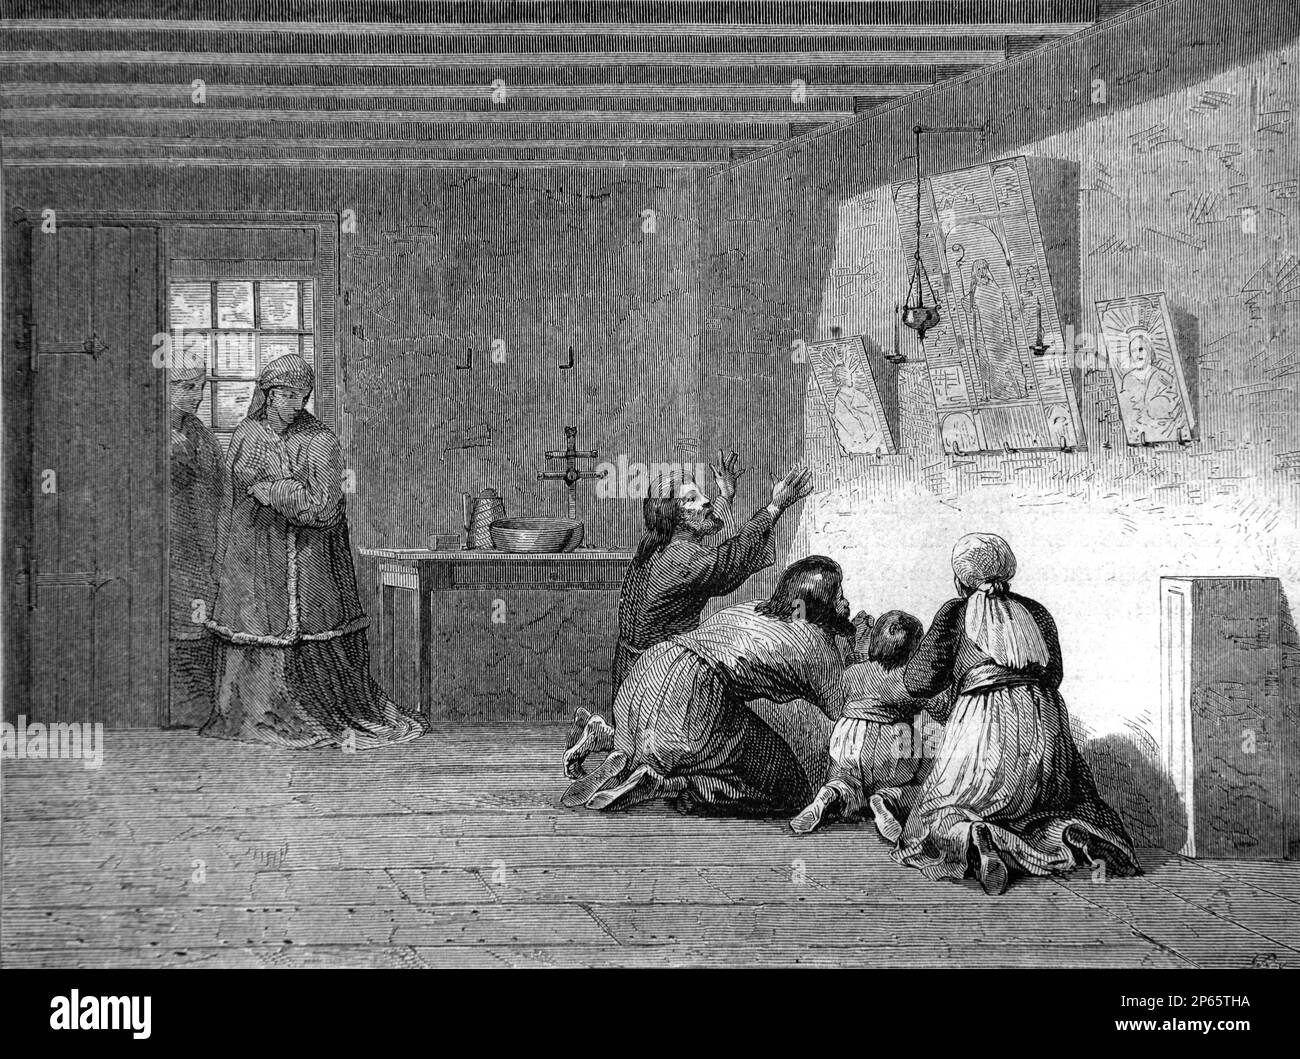 Family of Orthodox Christians Worshipping Icons or Adoration of Images in Siberia Russia. Vintage Engraving or Illustration 1862 Stock Photo